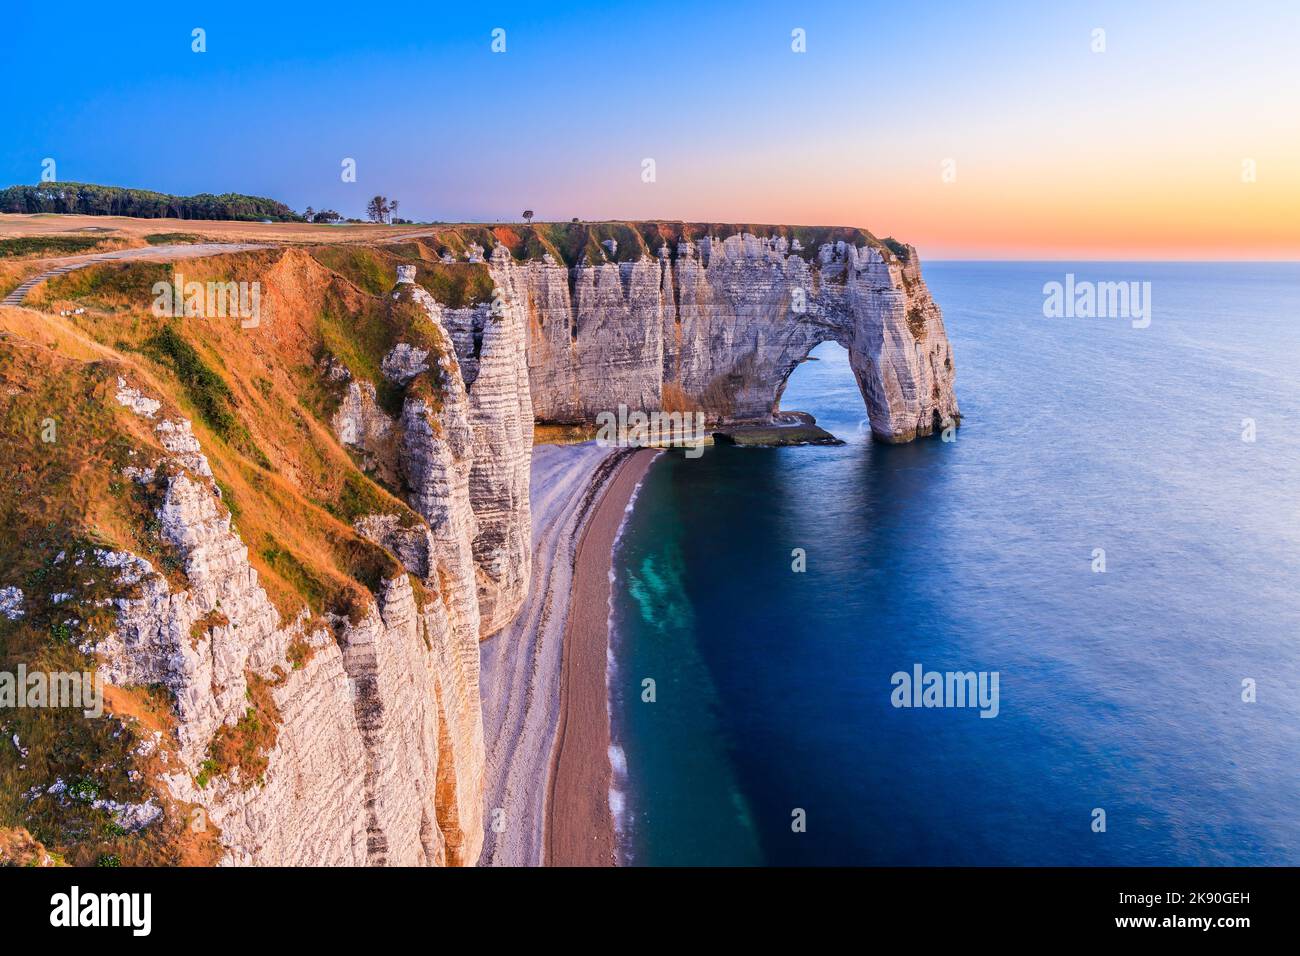 Deauville, Normandy, France.village cliffs with the Manneporte arch and the Valaine beach. Stock Photo